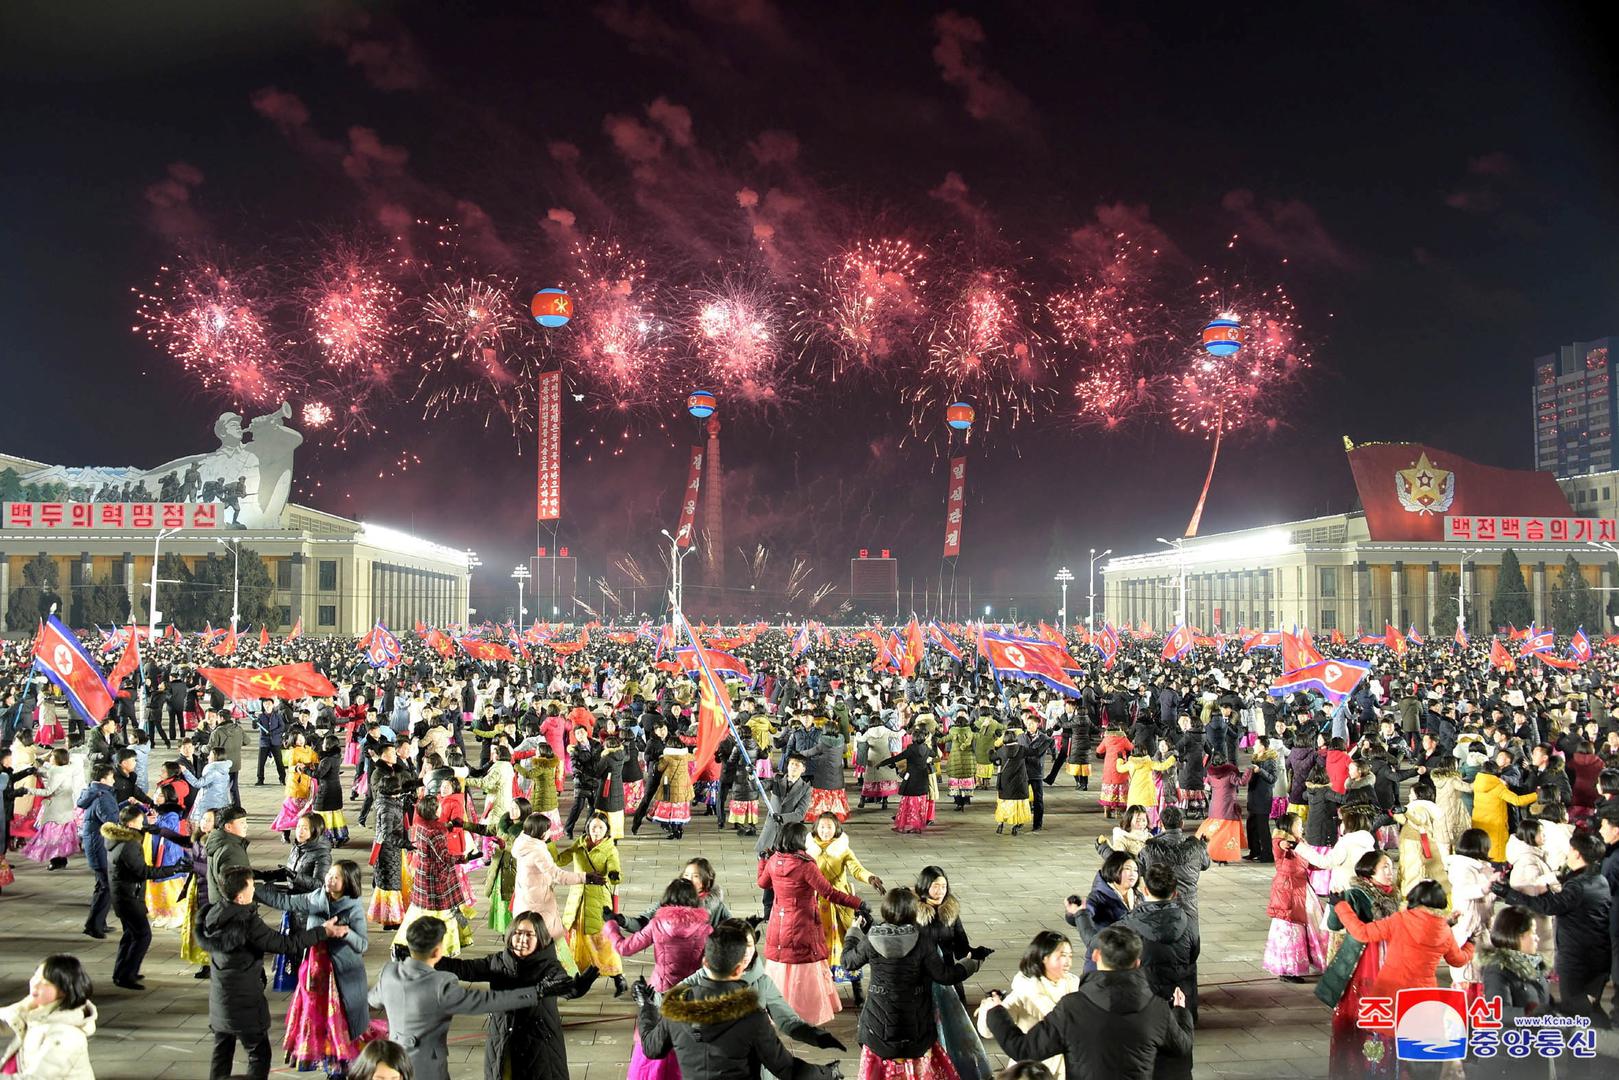 Fireworks to celebrate the 8th Congress of the Workers' Party in Pyongyang Fireworks explode above Kim Il Sung Square in Pyongyang, North Korea January 14, 2021 to celebrate the 8th Congress of the Workers' Party in this photo supplied by North Korea's Central News Agency (KCNA).    KCNA via REUTERS    ATTENTION EDITORS - THIS IMAGE WAS PROVIDED BY A THIRD PARTY. REUTERS IS UNABLE TO INDEPENDENTLY VERIFY THIS IMAGE. NO THIRD PARTY SALES. SOUTH KOREA OUT. NO COMMERCIAL OR EDITORIAL SALES IN SOUTH KOREA. KCNA